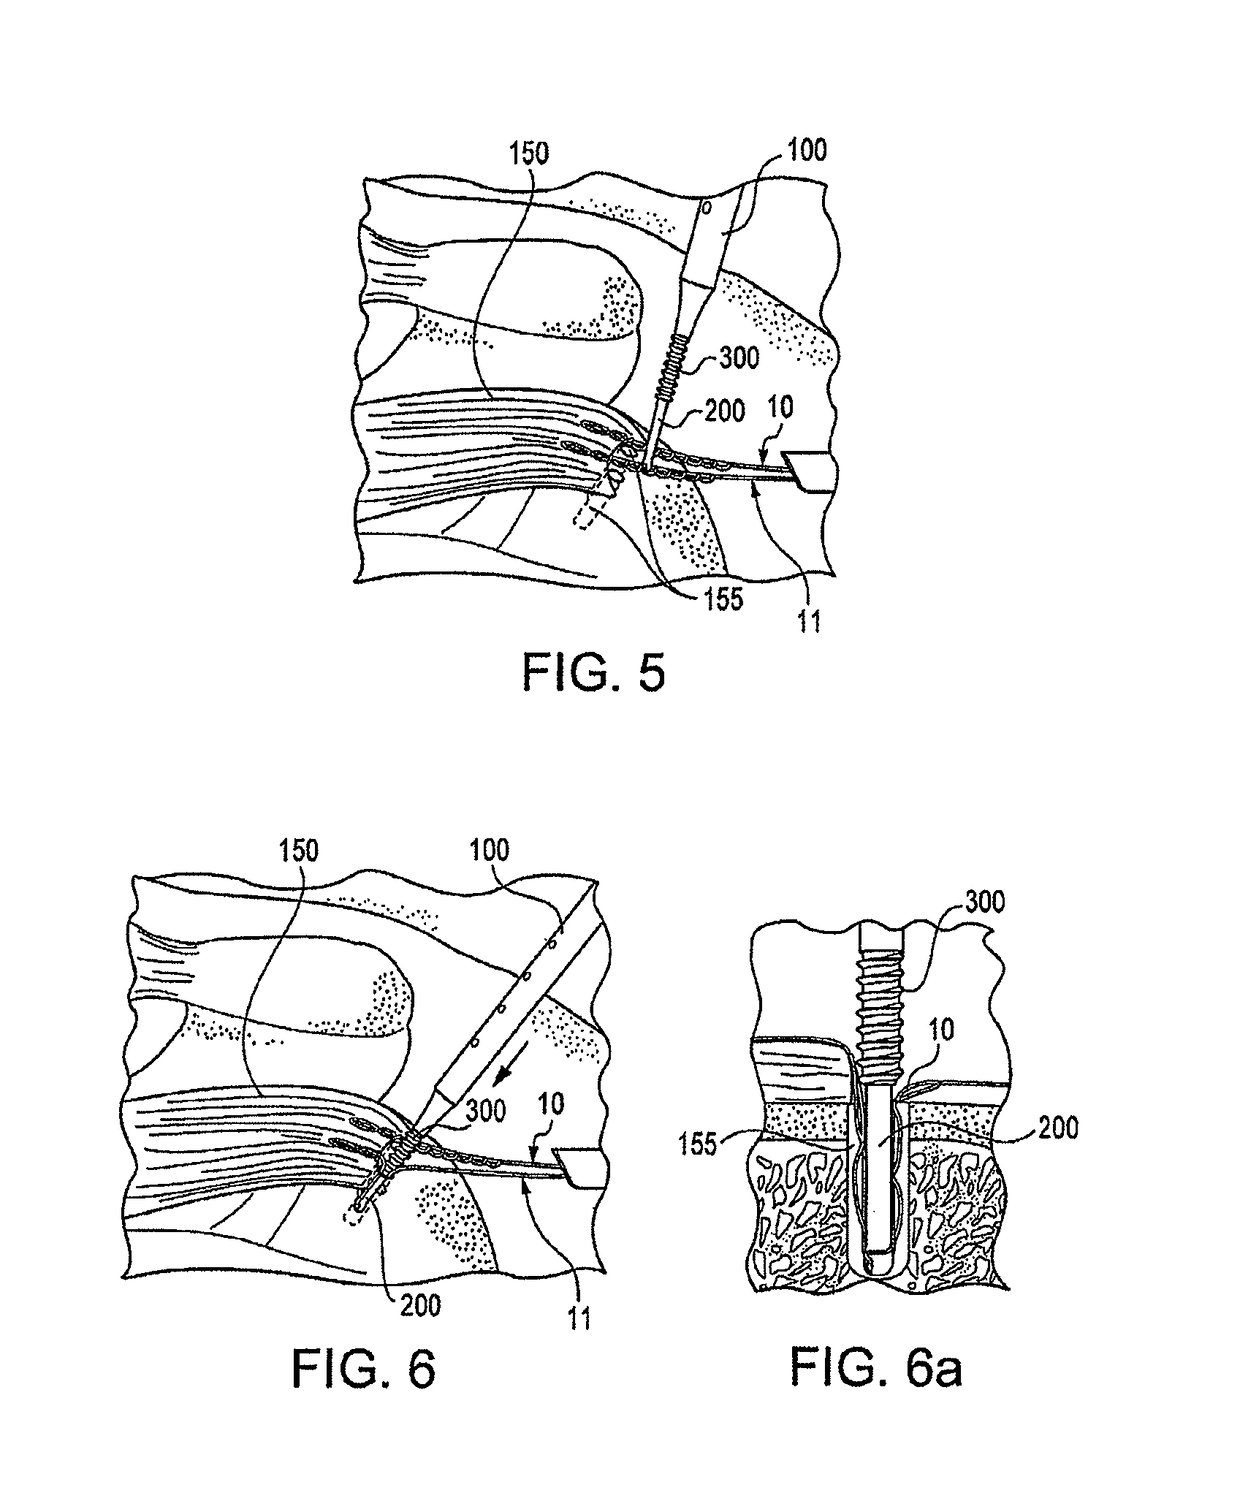 Method for knotless fixation of tissue with swivel anchor